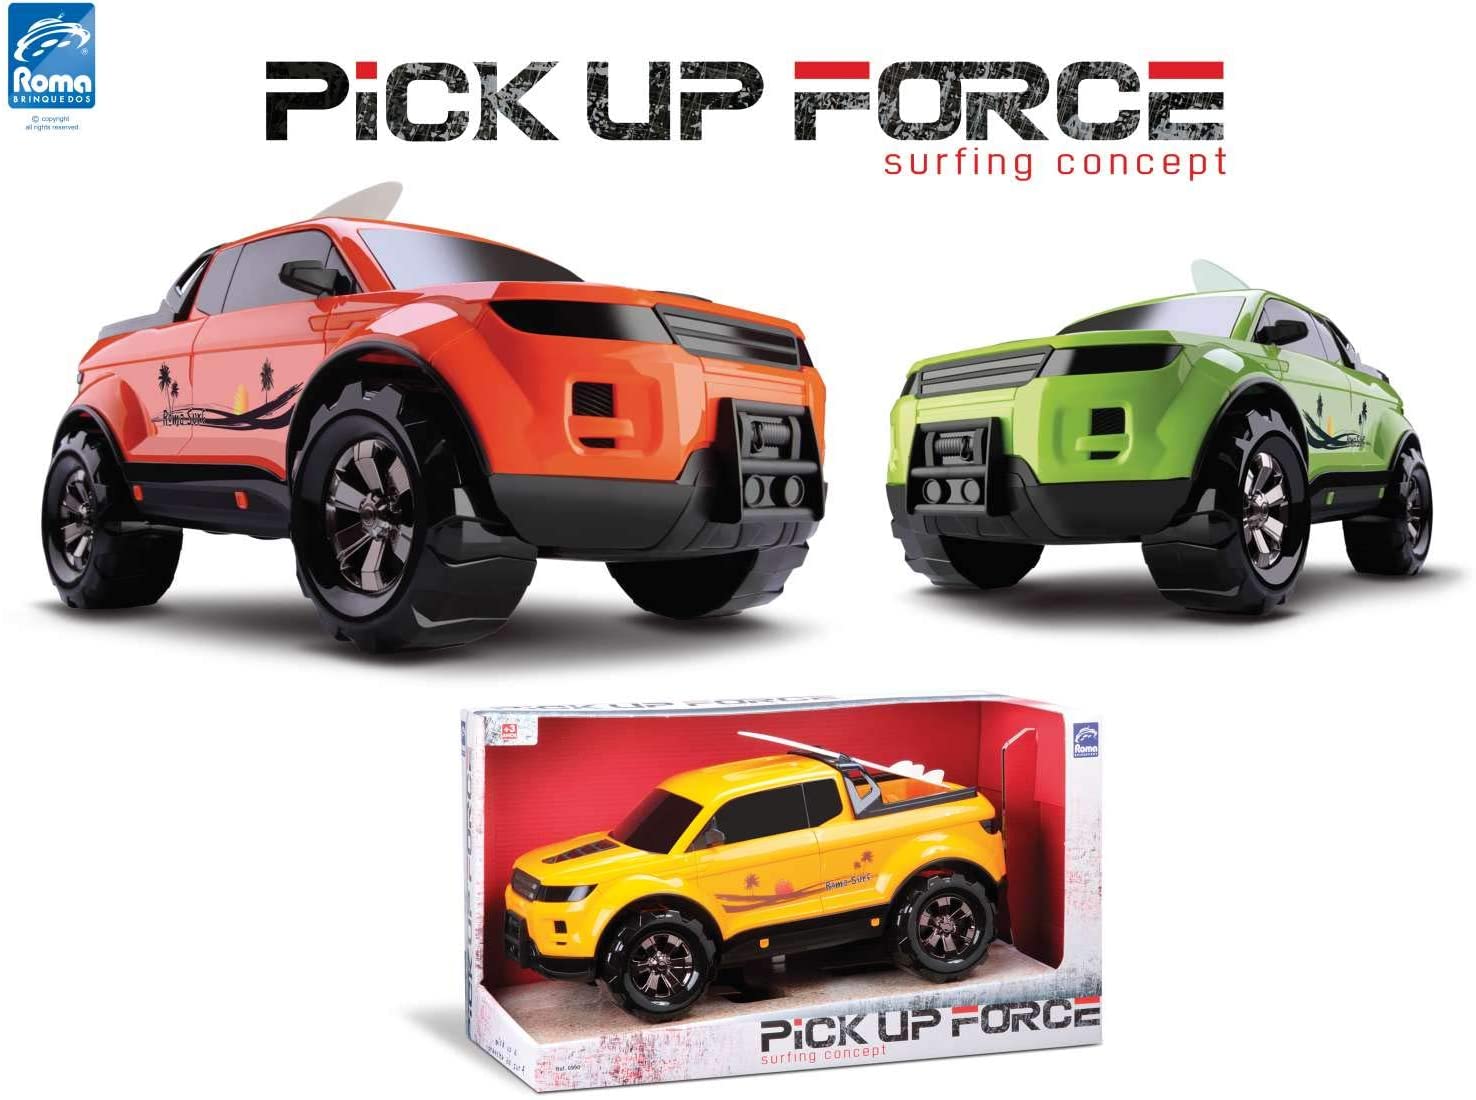 7896965209908 - PICK-UP FORCE SURFING CONCEPT ROMA BRINQUEDOS